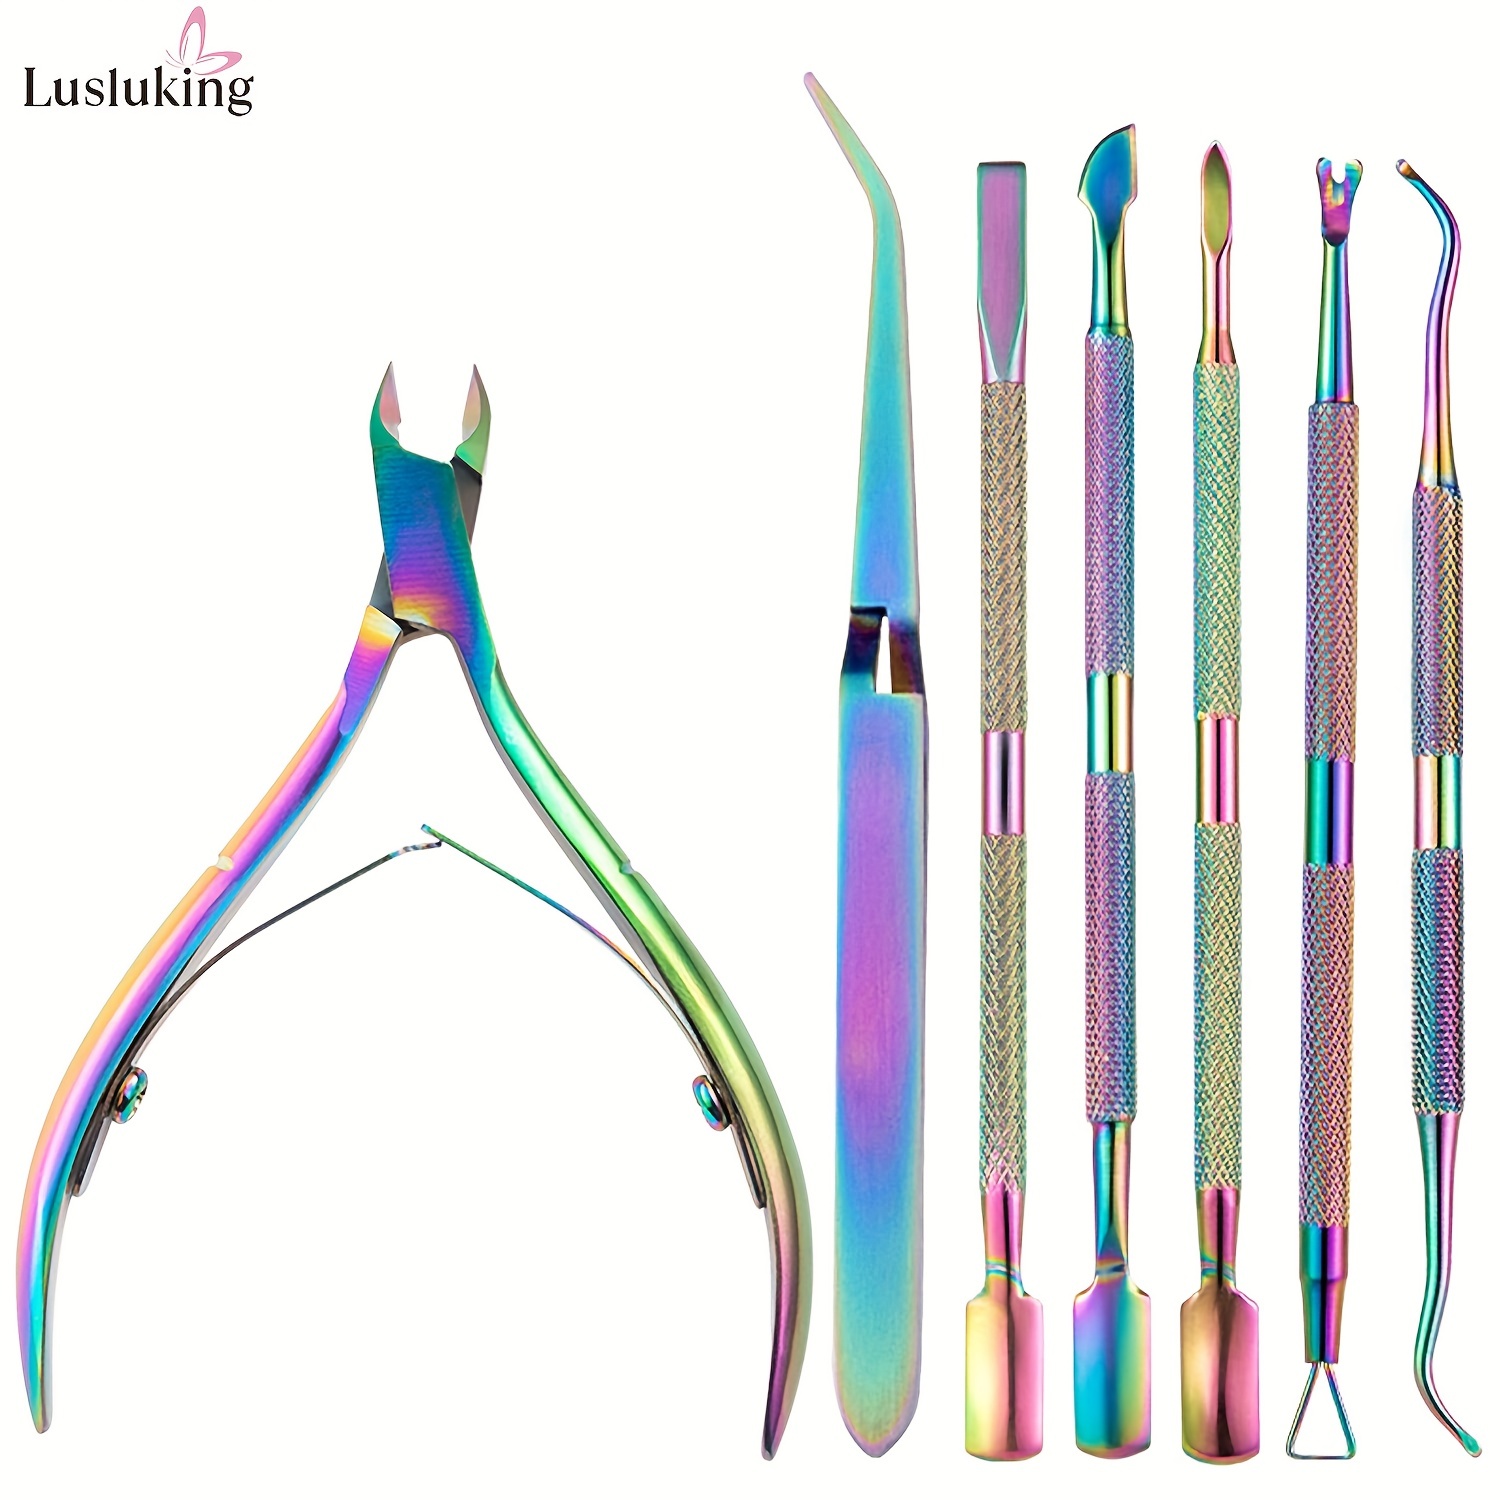 

7 Pcs/set Stainless Steel Nail Cuticle Scissors Set, With Dead Skin Pusher, Manicure Pedicure Tools, Nail Files, Uv Polish Gel Remover, Perfect For Nail Care